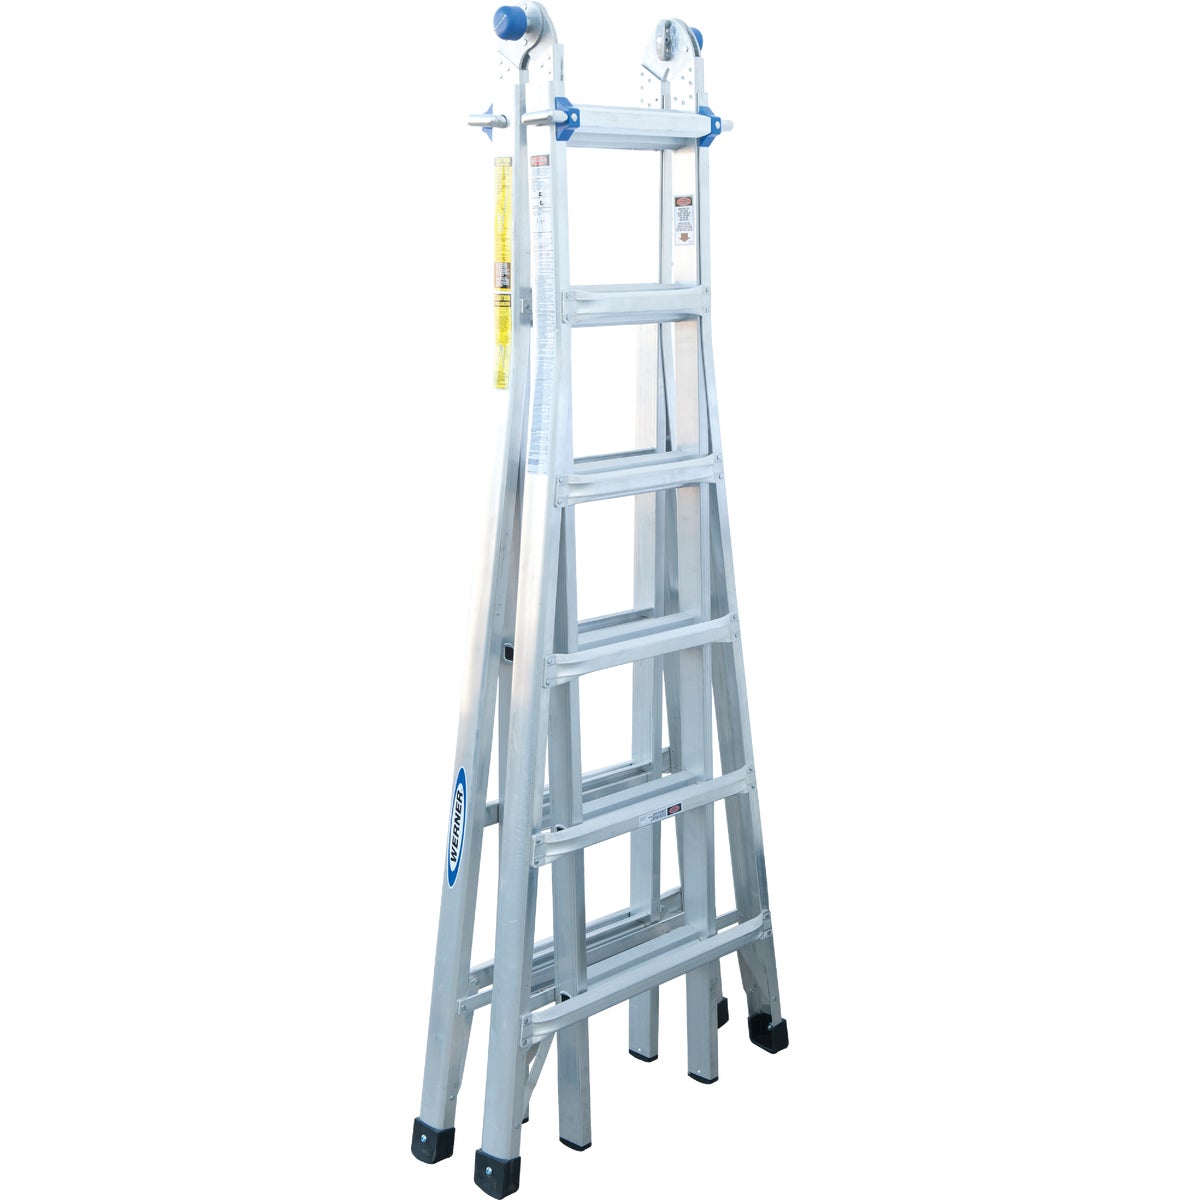 Werner 23 Ft. Aluminum Multi-Position Telescoping Ladder with 300 Lb. Load Capacity Type IA Ladder Rating